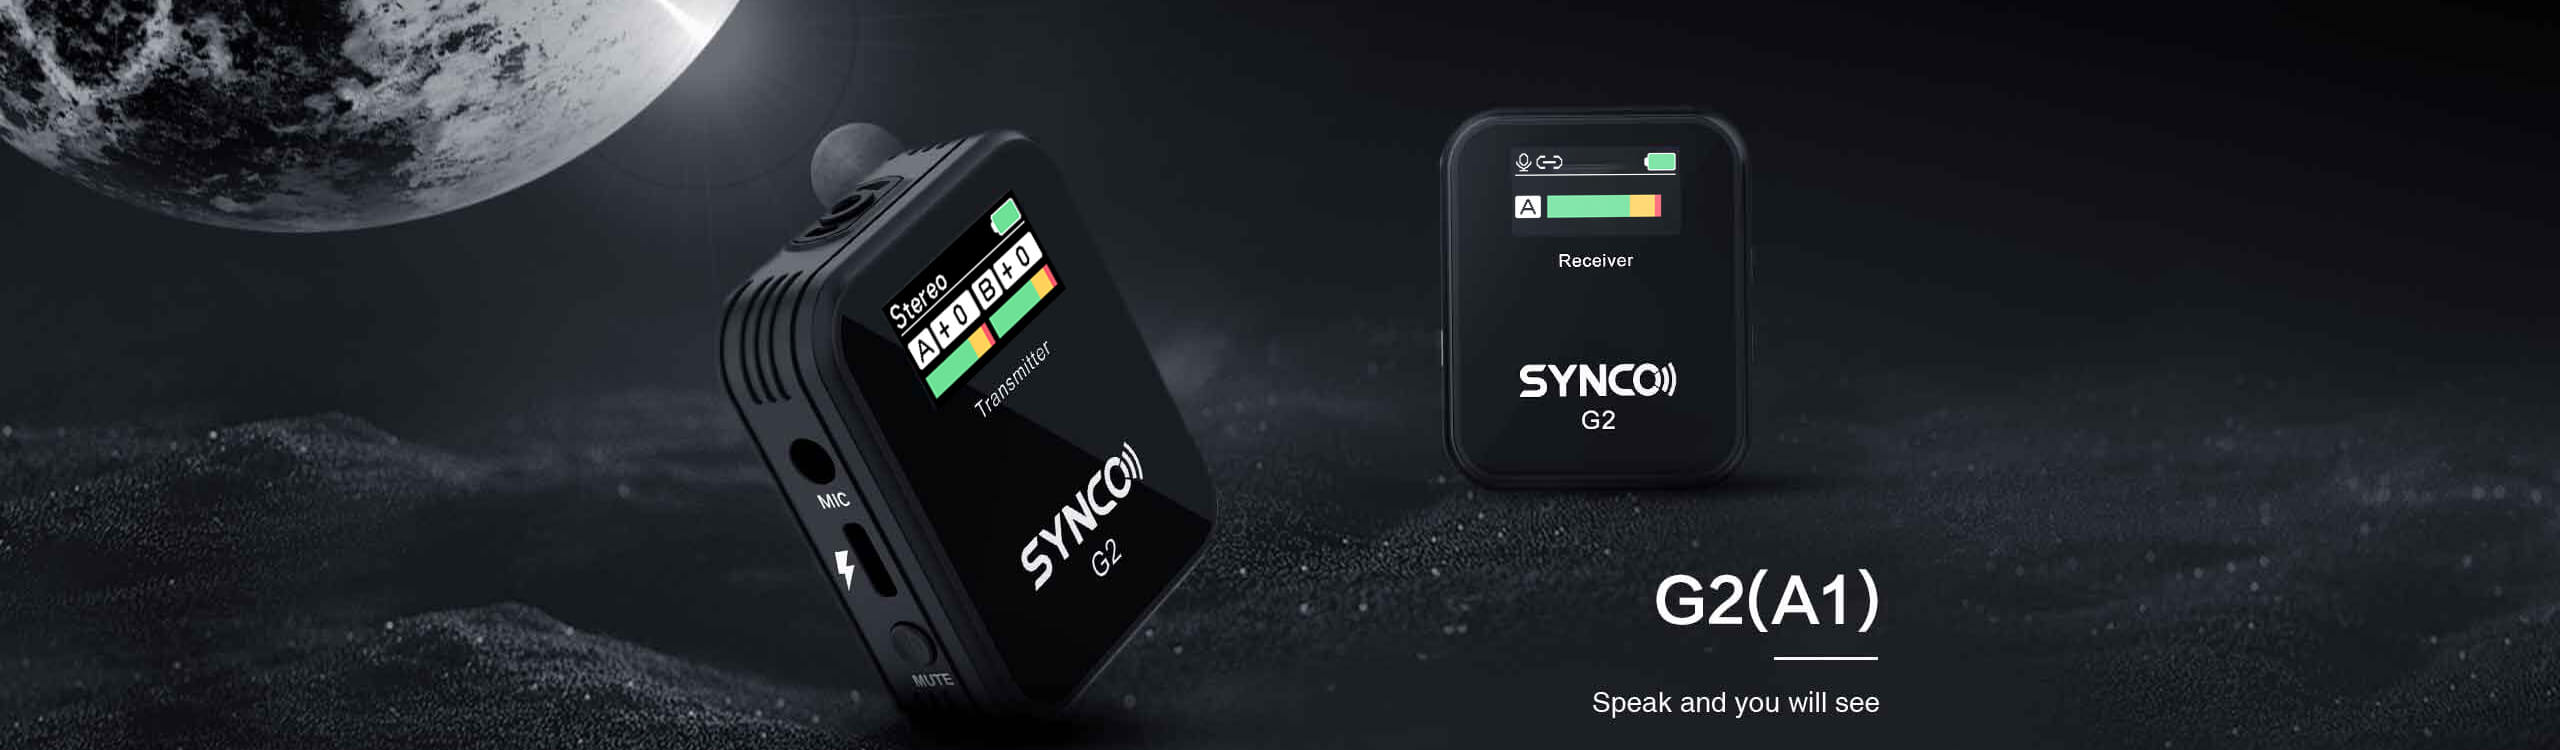 SYNCO G2(A1) portable wireless microphone includes a transmitter and receiver. Each has a screen.